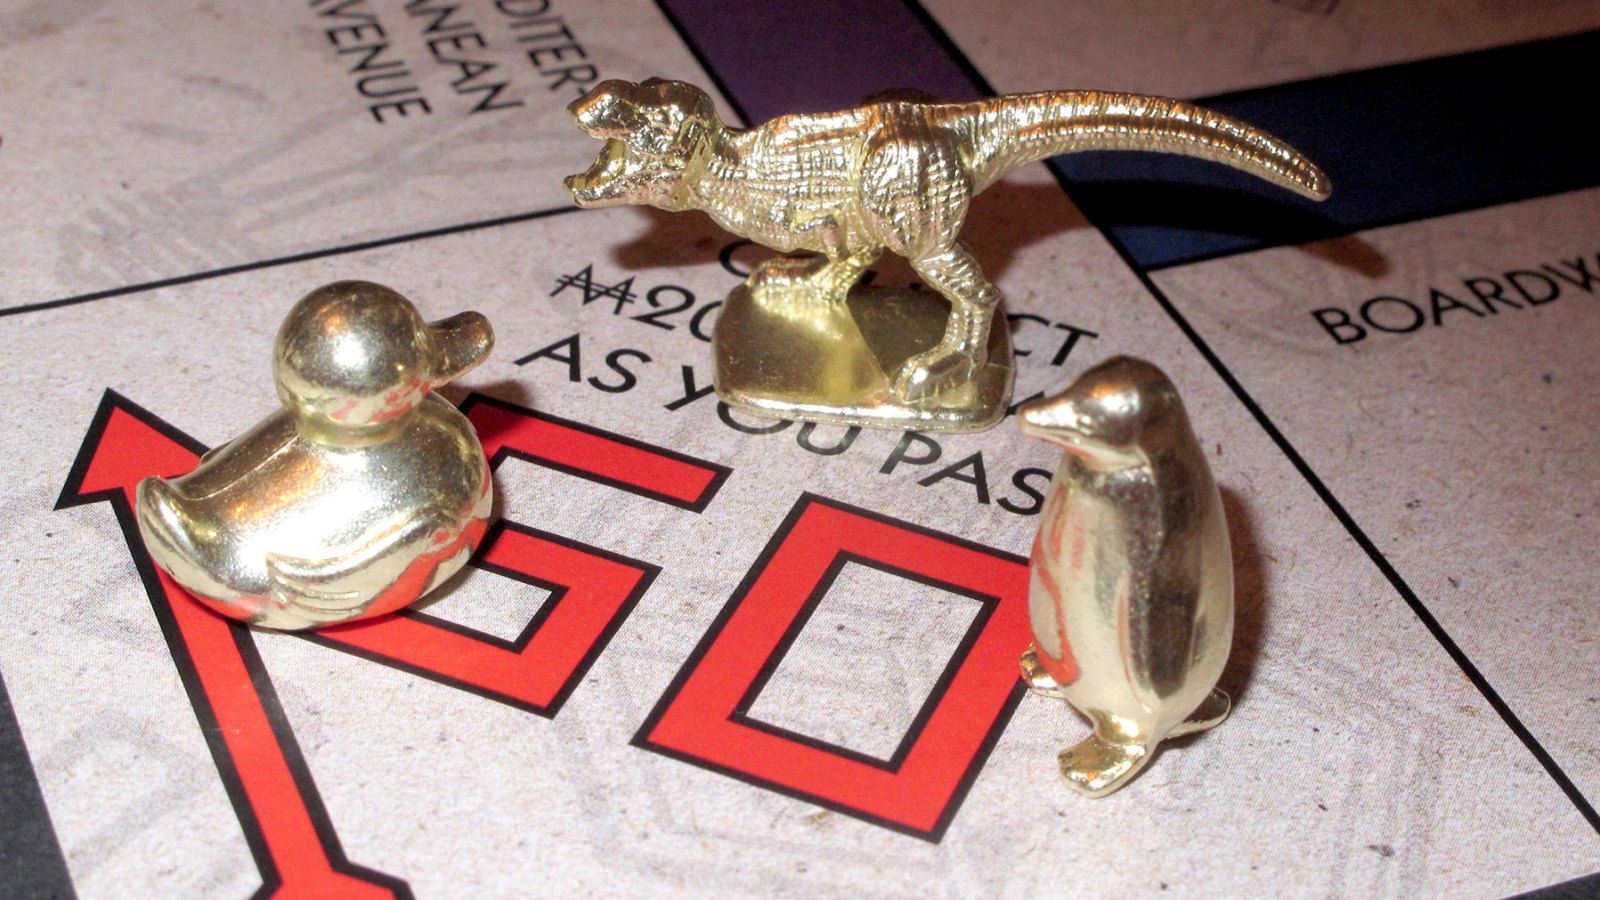 The three new tokens in Monopoly.